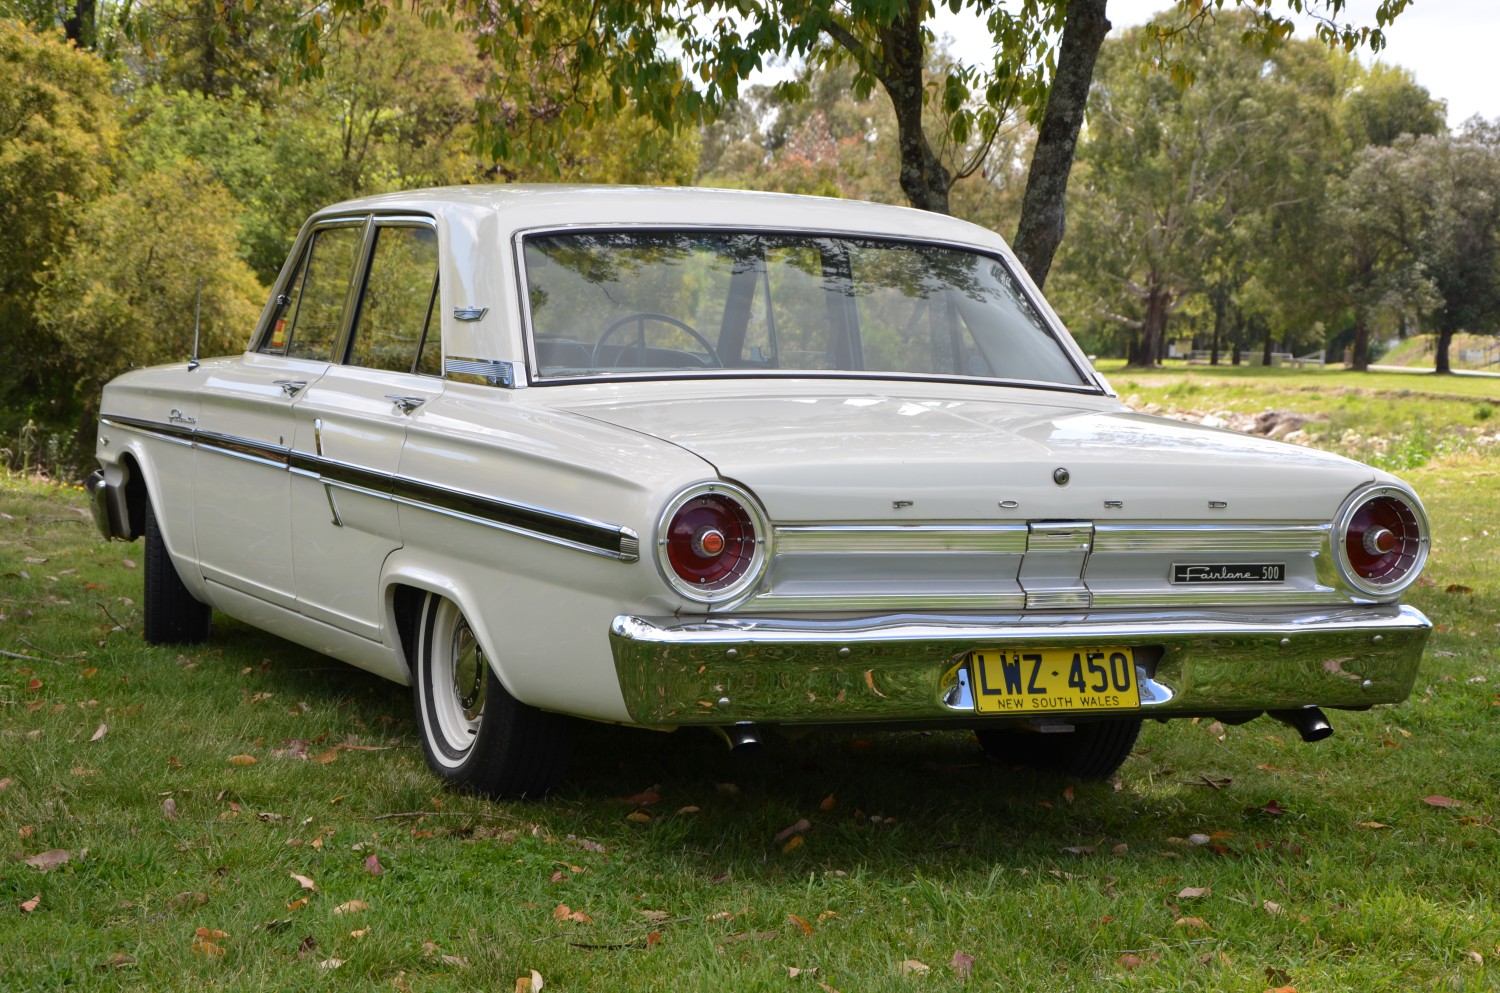 1964 Ford compact fairlane - doogs - Shannons Club